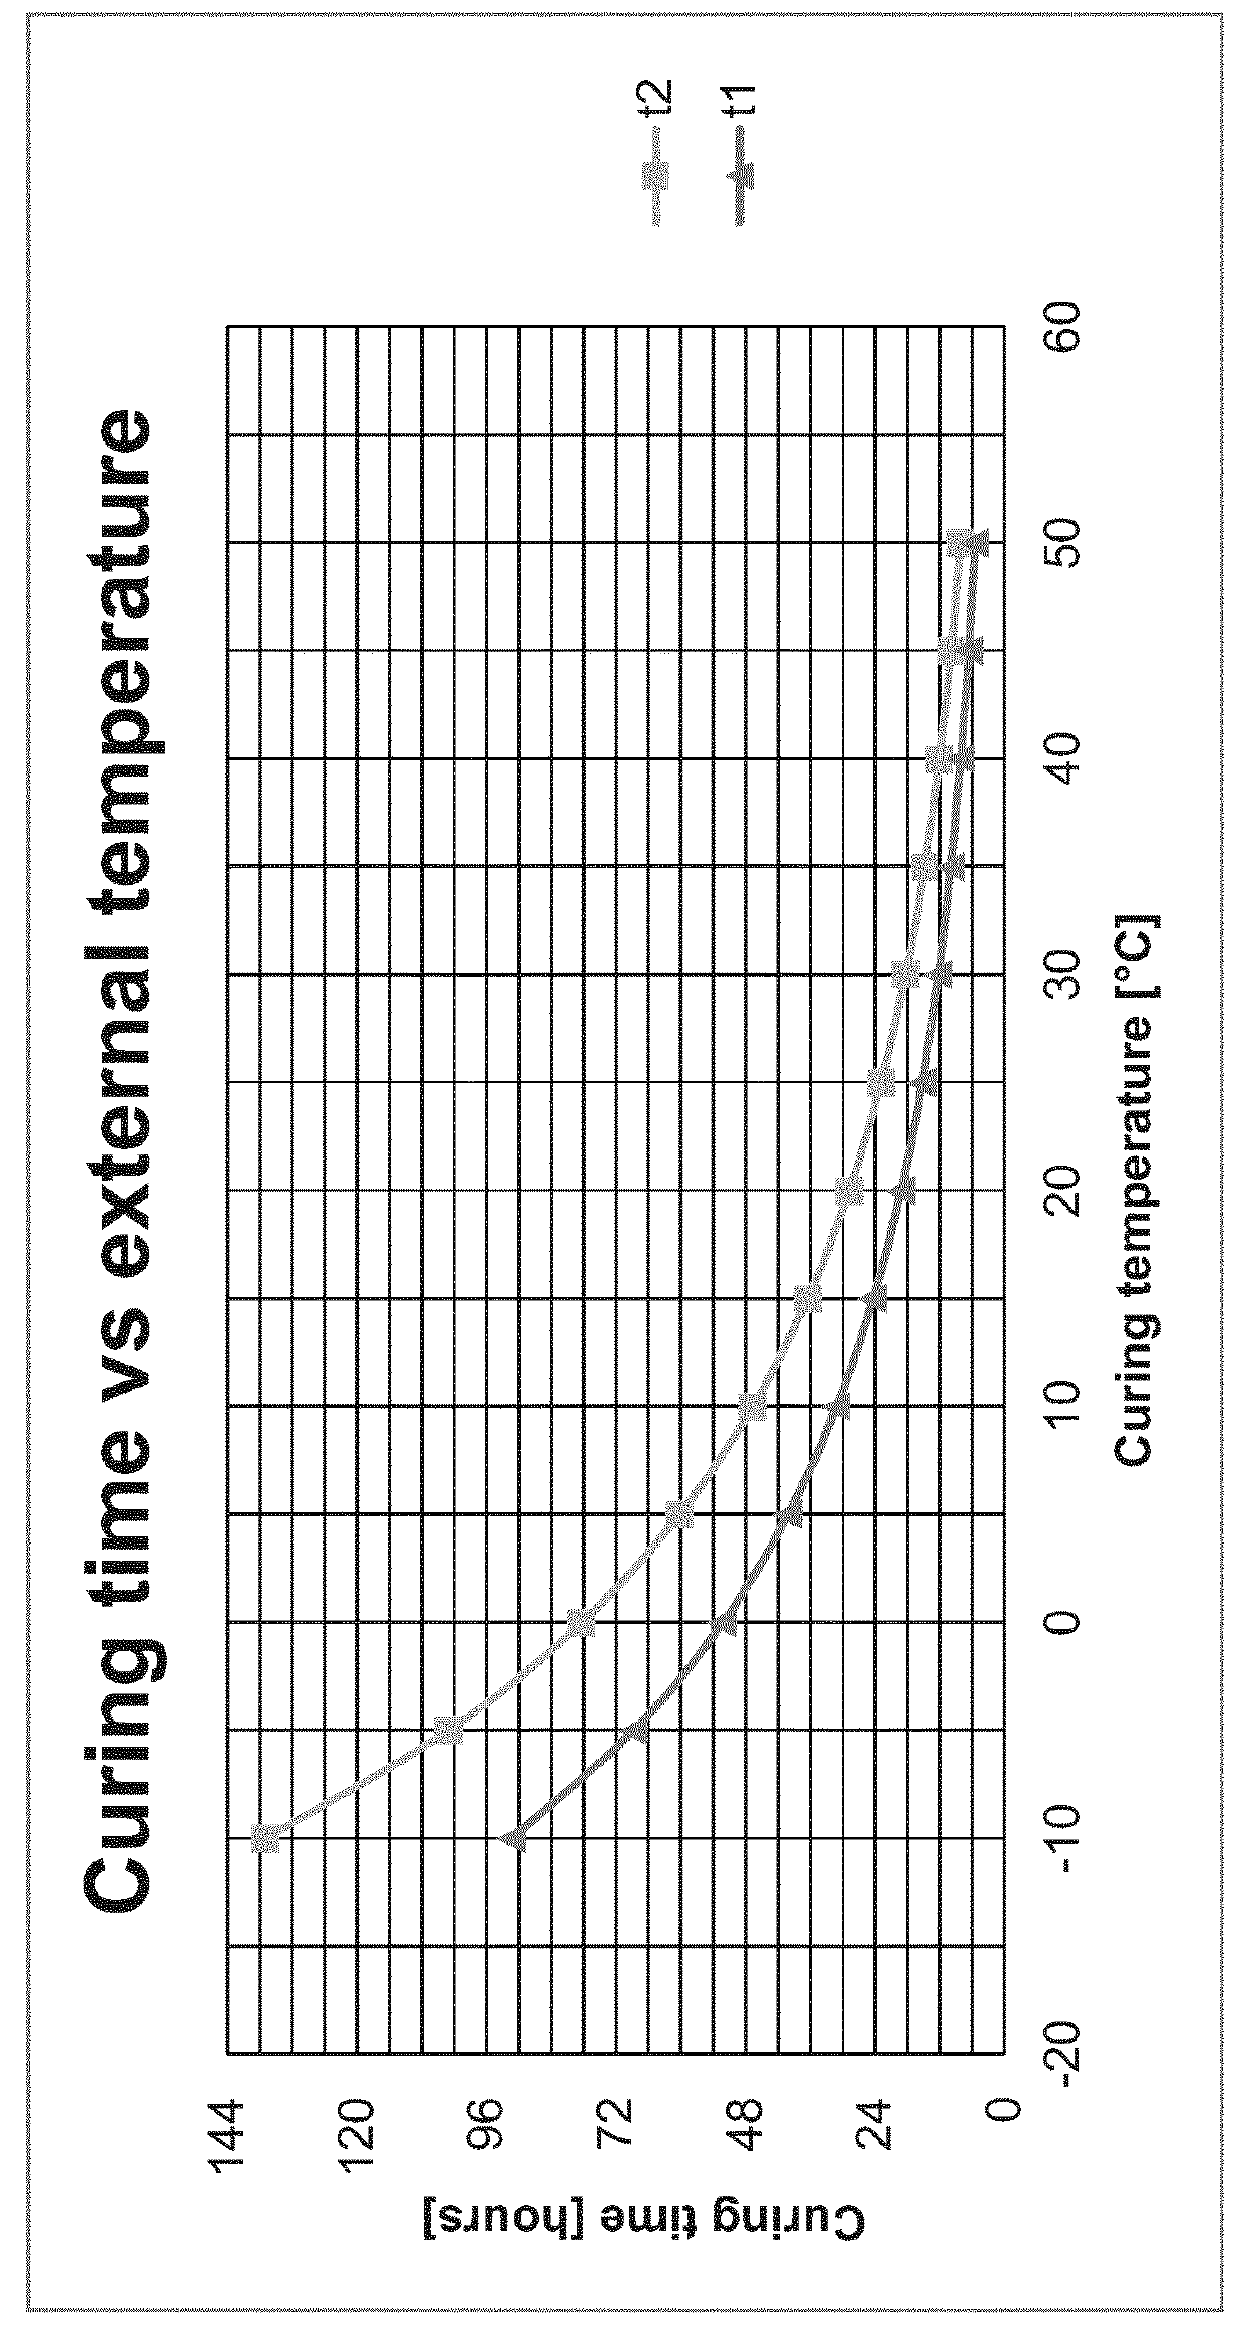 Method to produce aggregates from unsettled cementitious mixtures